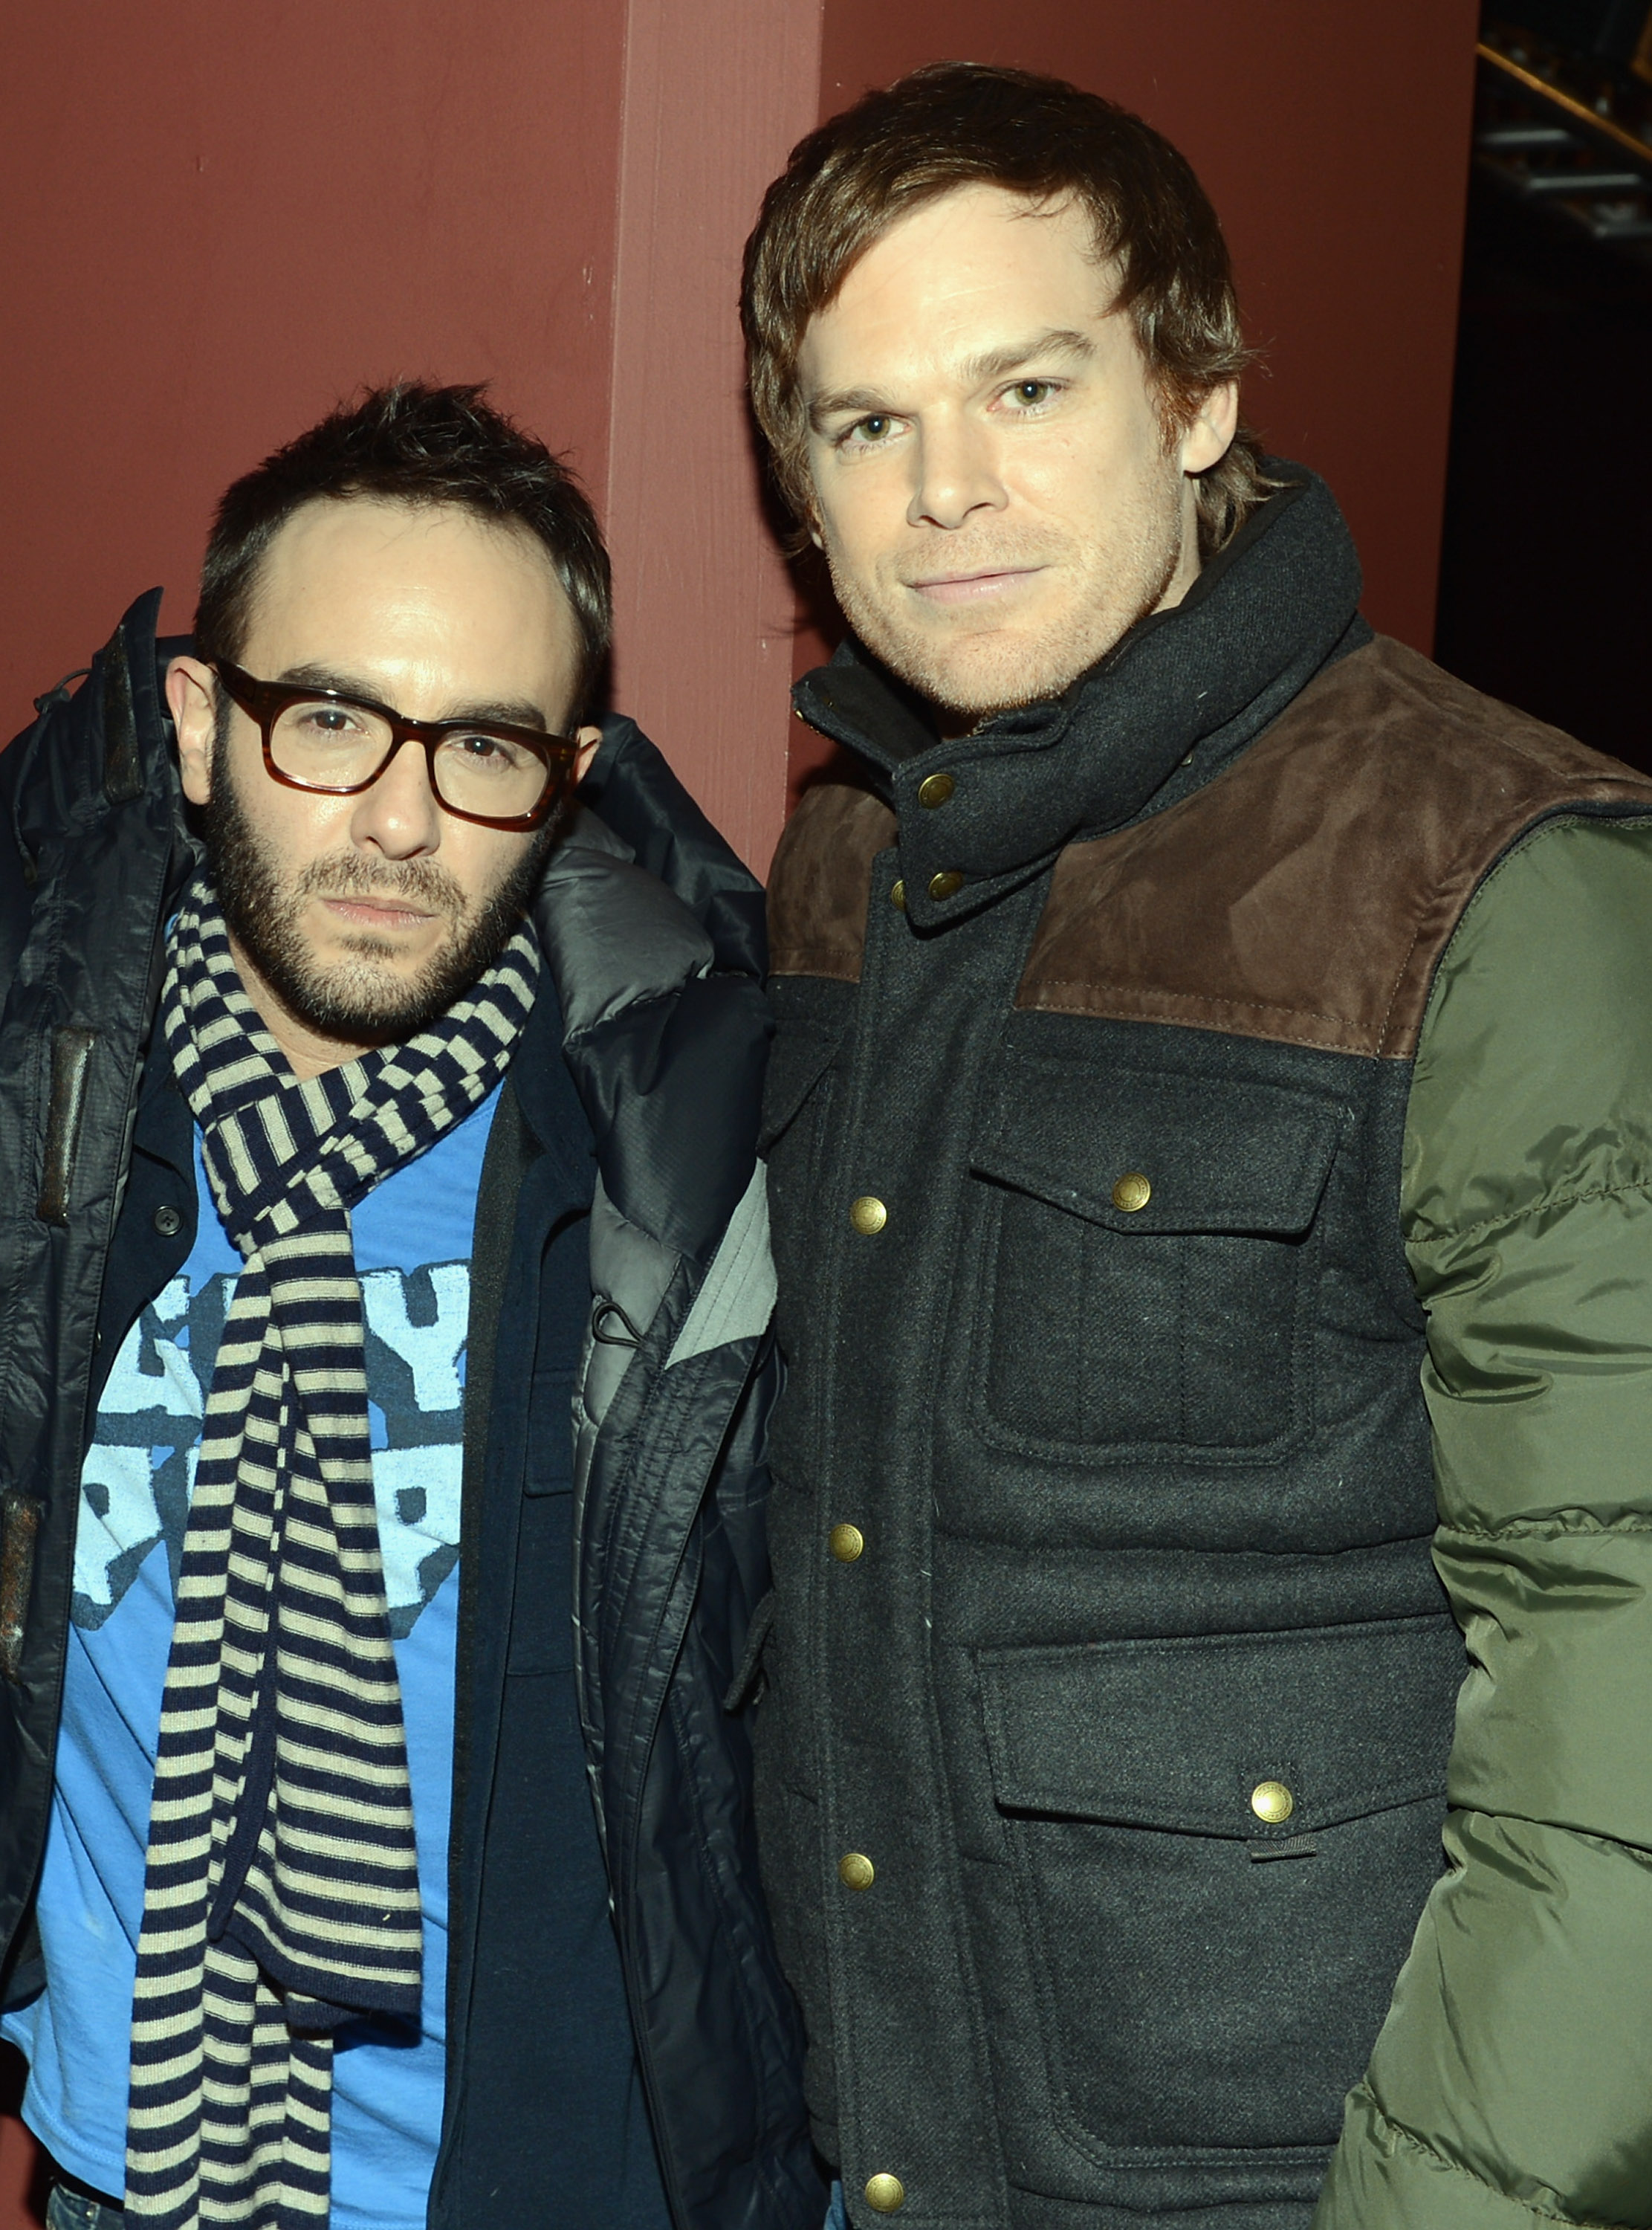 PARK CITY, UT - JANUARY 19:  (L-R) Director John Krokidas and actor Michael C. Hall attend the Stella Artois "Kill Your Darlings" press junket on January 19, 2013 in Park City, Utah.  (Photo by Andrew H. Walker/Getty Images for Stella Artois)